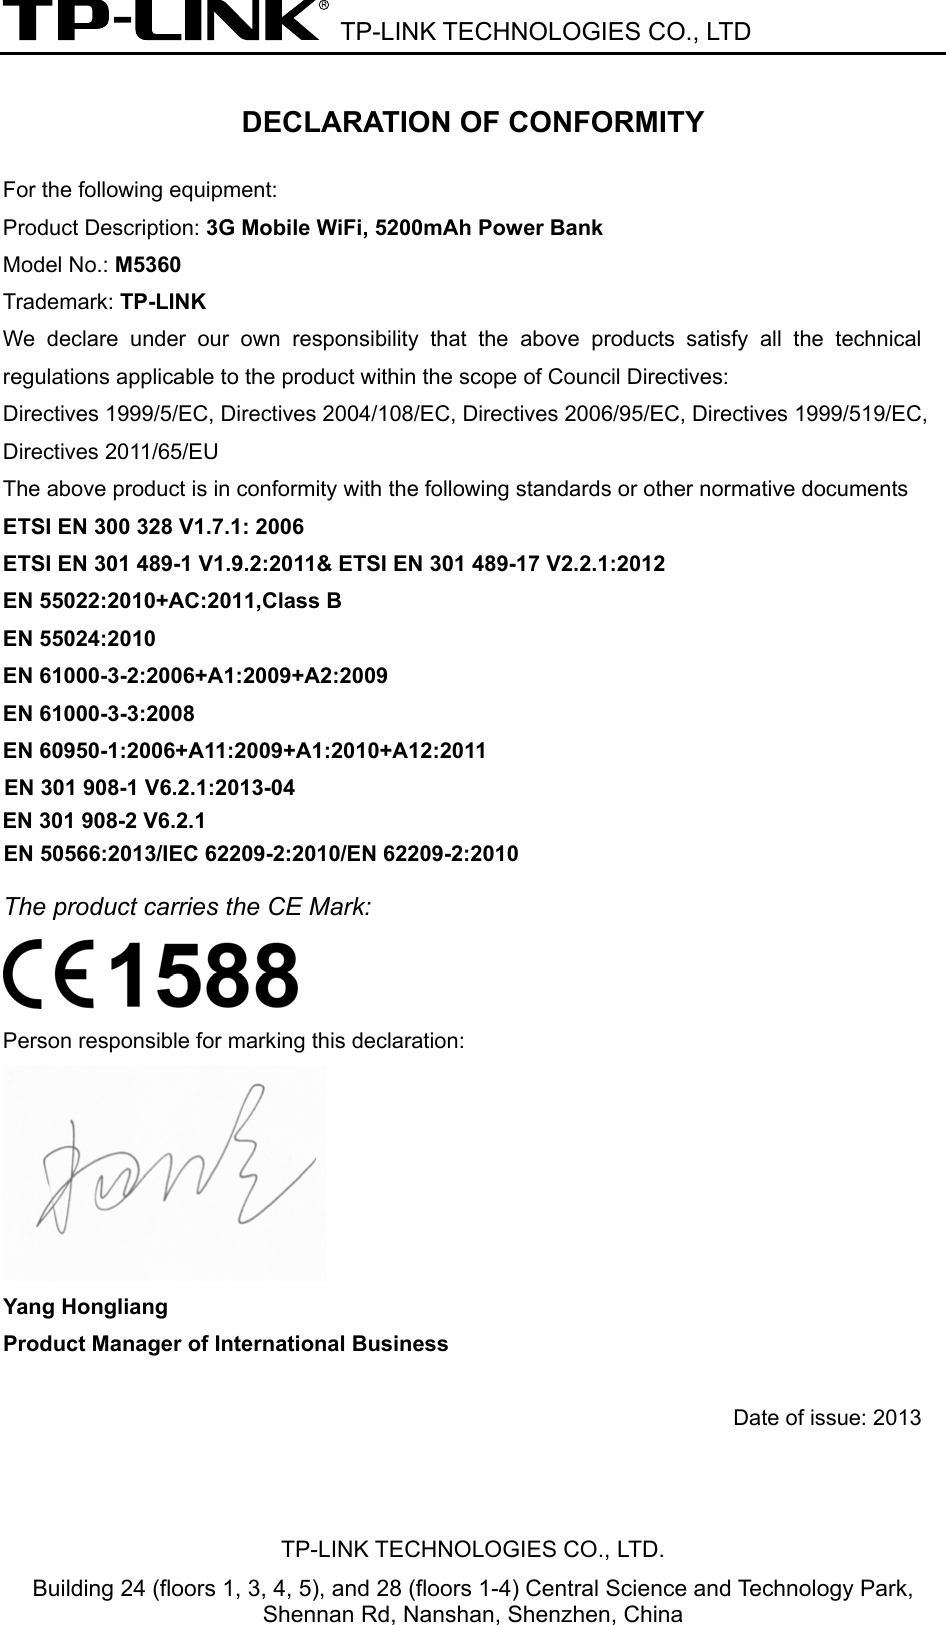  TP-LINK TECHNOLOGIES CO., LTD DECLARATION OF CONFORMITY For the following equipment: Product Description: 3G Mobile WiFi, 5200mAh Power Bank Model No.: M5360  Trademark: TP-LINK    We declare under our own responsibility that the above products satisfy all the technical regulations applicable to the product within the scope of Council Directives:     Directives 1999/5/EC, Directives 2004/108/EC, Directives 2006/95/EC, Directives 1999/519/EC, Directives 2011/65/EU The above product is in conformity with the following standards or other normative documents ETSI EN 300 328 V1.7.1: 2006 ETSI EN 301 489-1 V1.9.2:2011&amp; ETSI EN 301 489-17 V2.2.1:2012 EN 55022:2010+AC:2011,Class B EN 55024:2010 EN 61000-3-2:2006+A1:2009+A2:2009 EN 61000-3-3:2008 EN 60950-1:2006+A11:2009+A1:2010+A12:2011 The product carries the CE Mark:  Person responsible for marking this declaration:  Yang Hongliang Product Manager of International Business    Date of issue: 2013TP-LINK TECHNOLOGIES CO., LTD. Building 24 (floors 1, 3, 4, 5), and 28 (floors 1-4) Central Science and Technology Park, Shennan Rd, Nanshan, Shenzhen, China EN 301 908-1 V6.2.1:2013-04  EN 50566:2013/IEC 62209-2:2010/EN 62209-2:2010EN 301 908-2 V6.2.1 